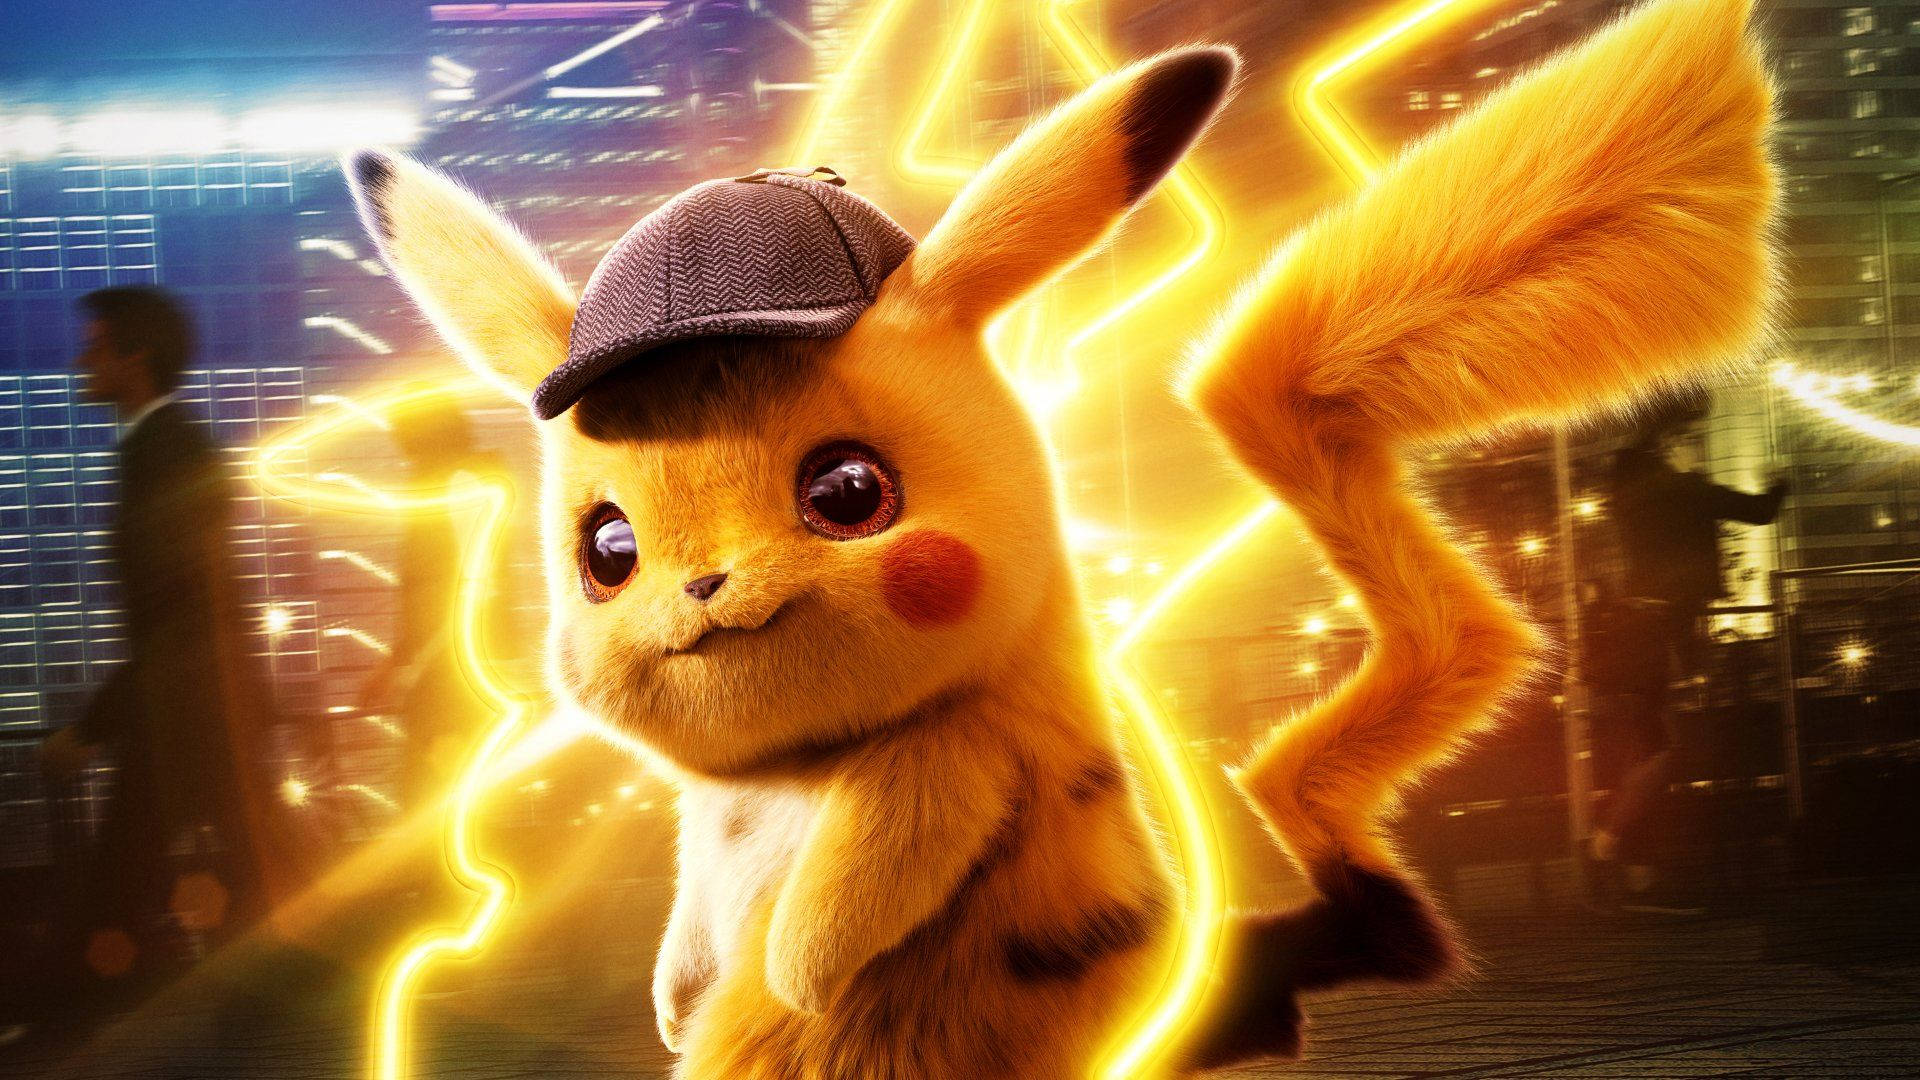 Pikachu 3d Sparkling With Electricity Background